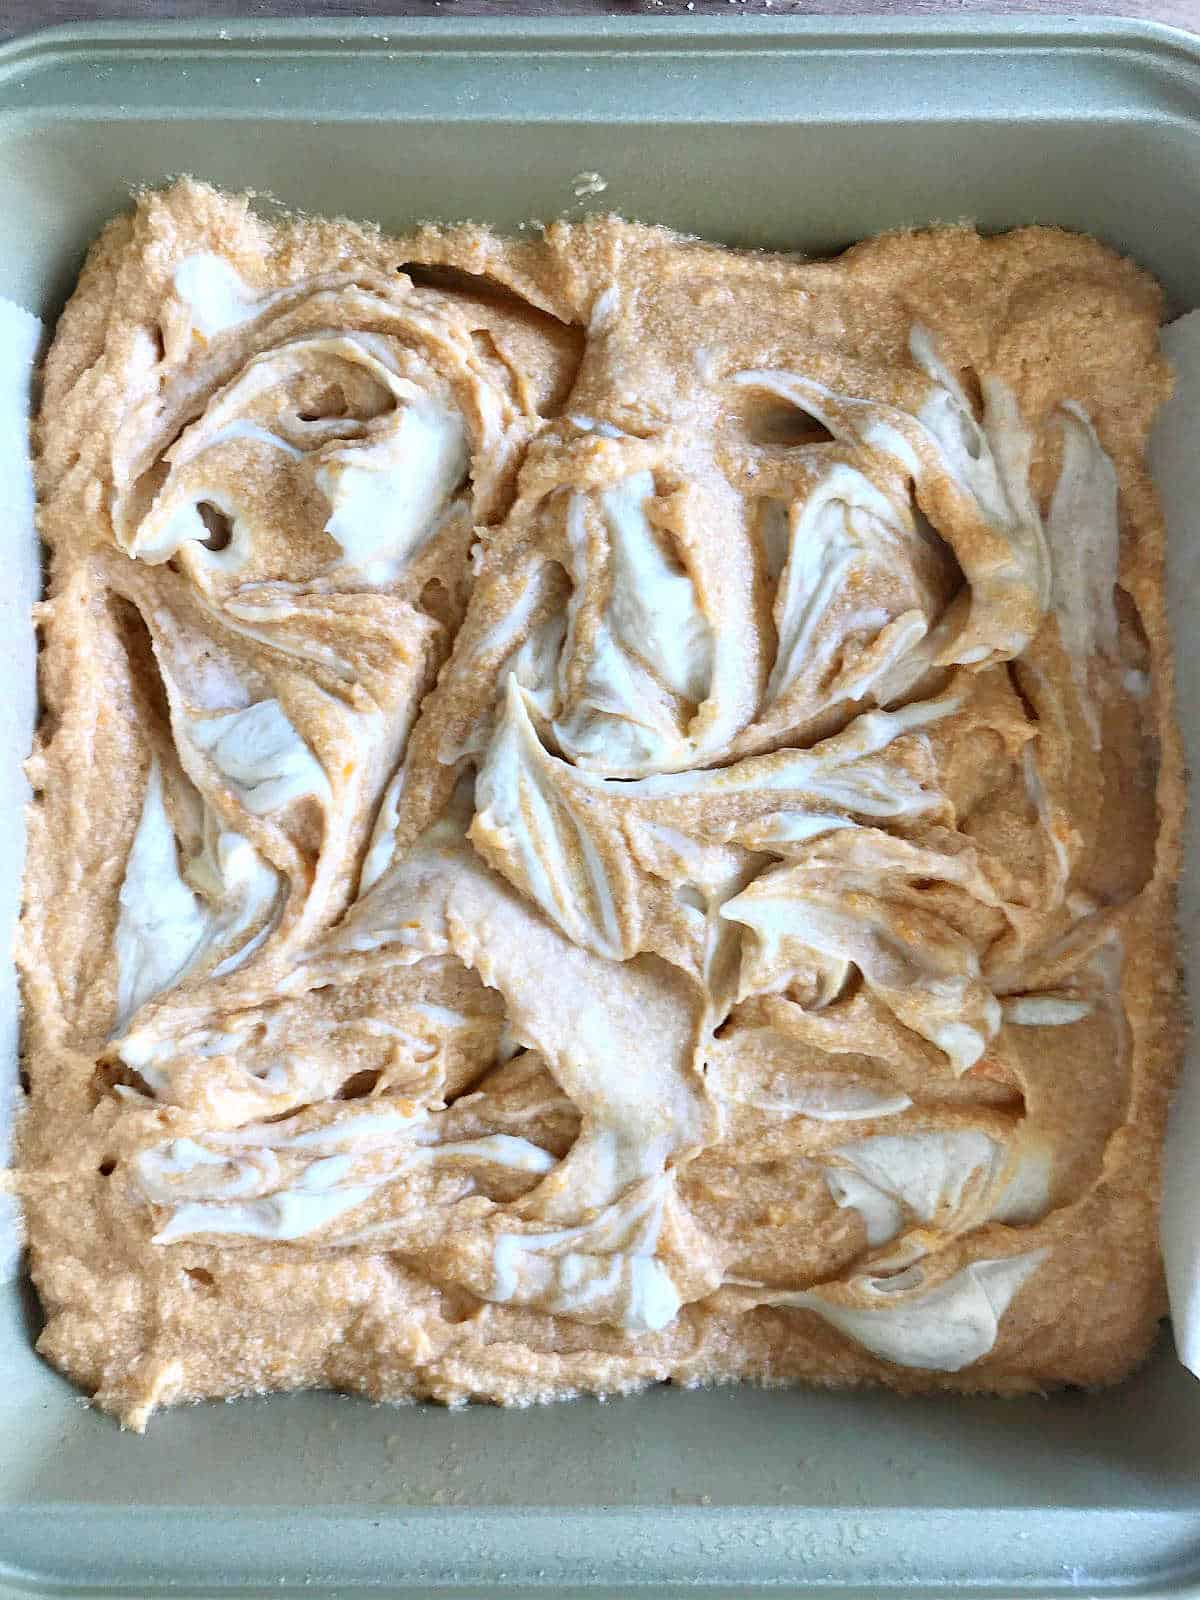 Swirled white mixture on pumpkin mixture in a metal square pan.